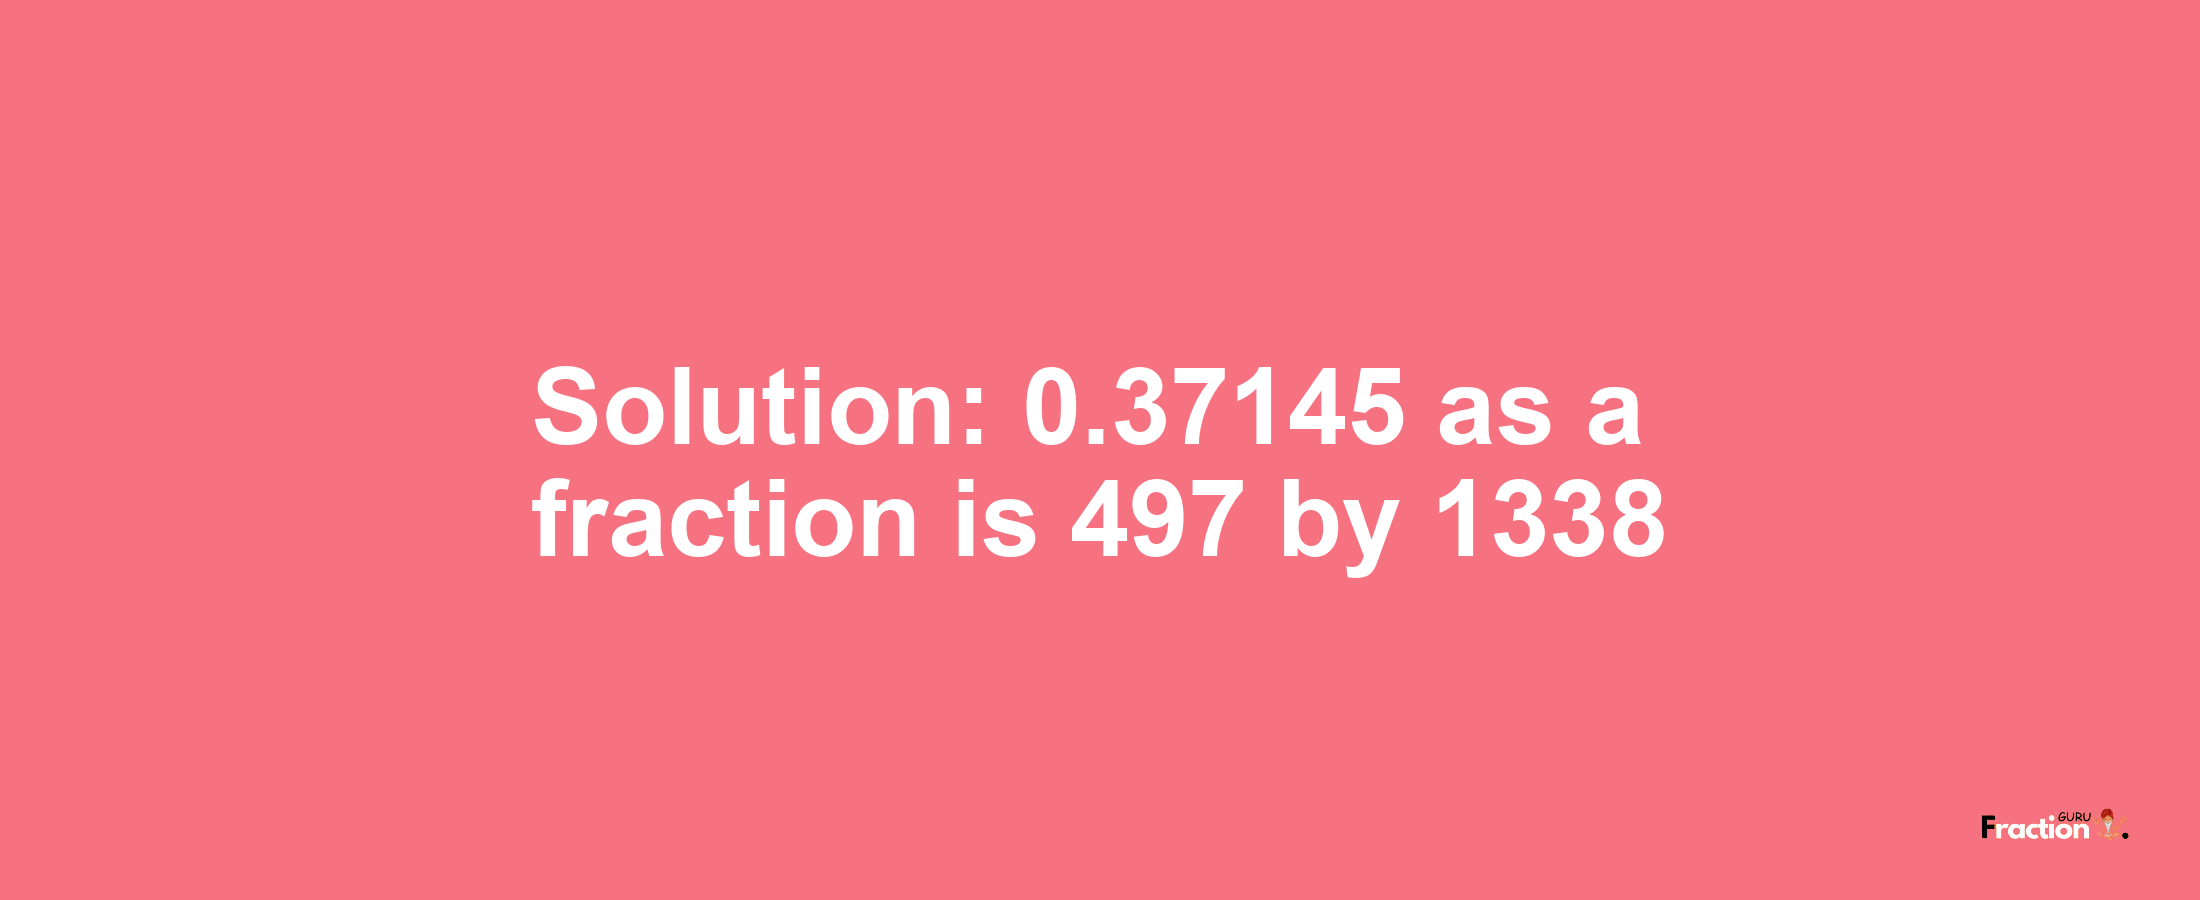 Solution:0.37145 as a fraction is 497/1338